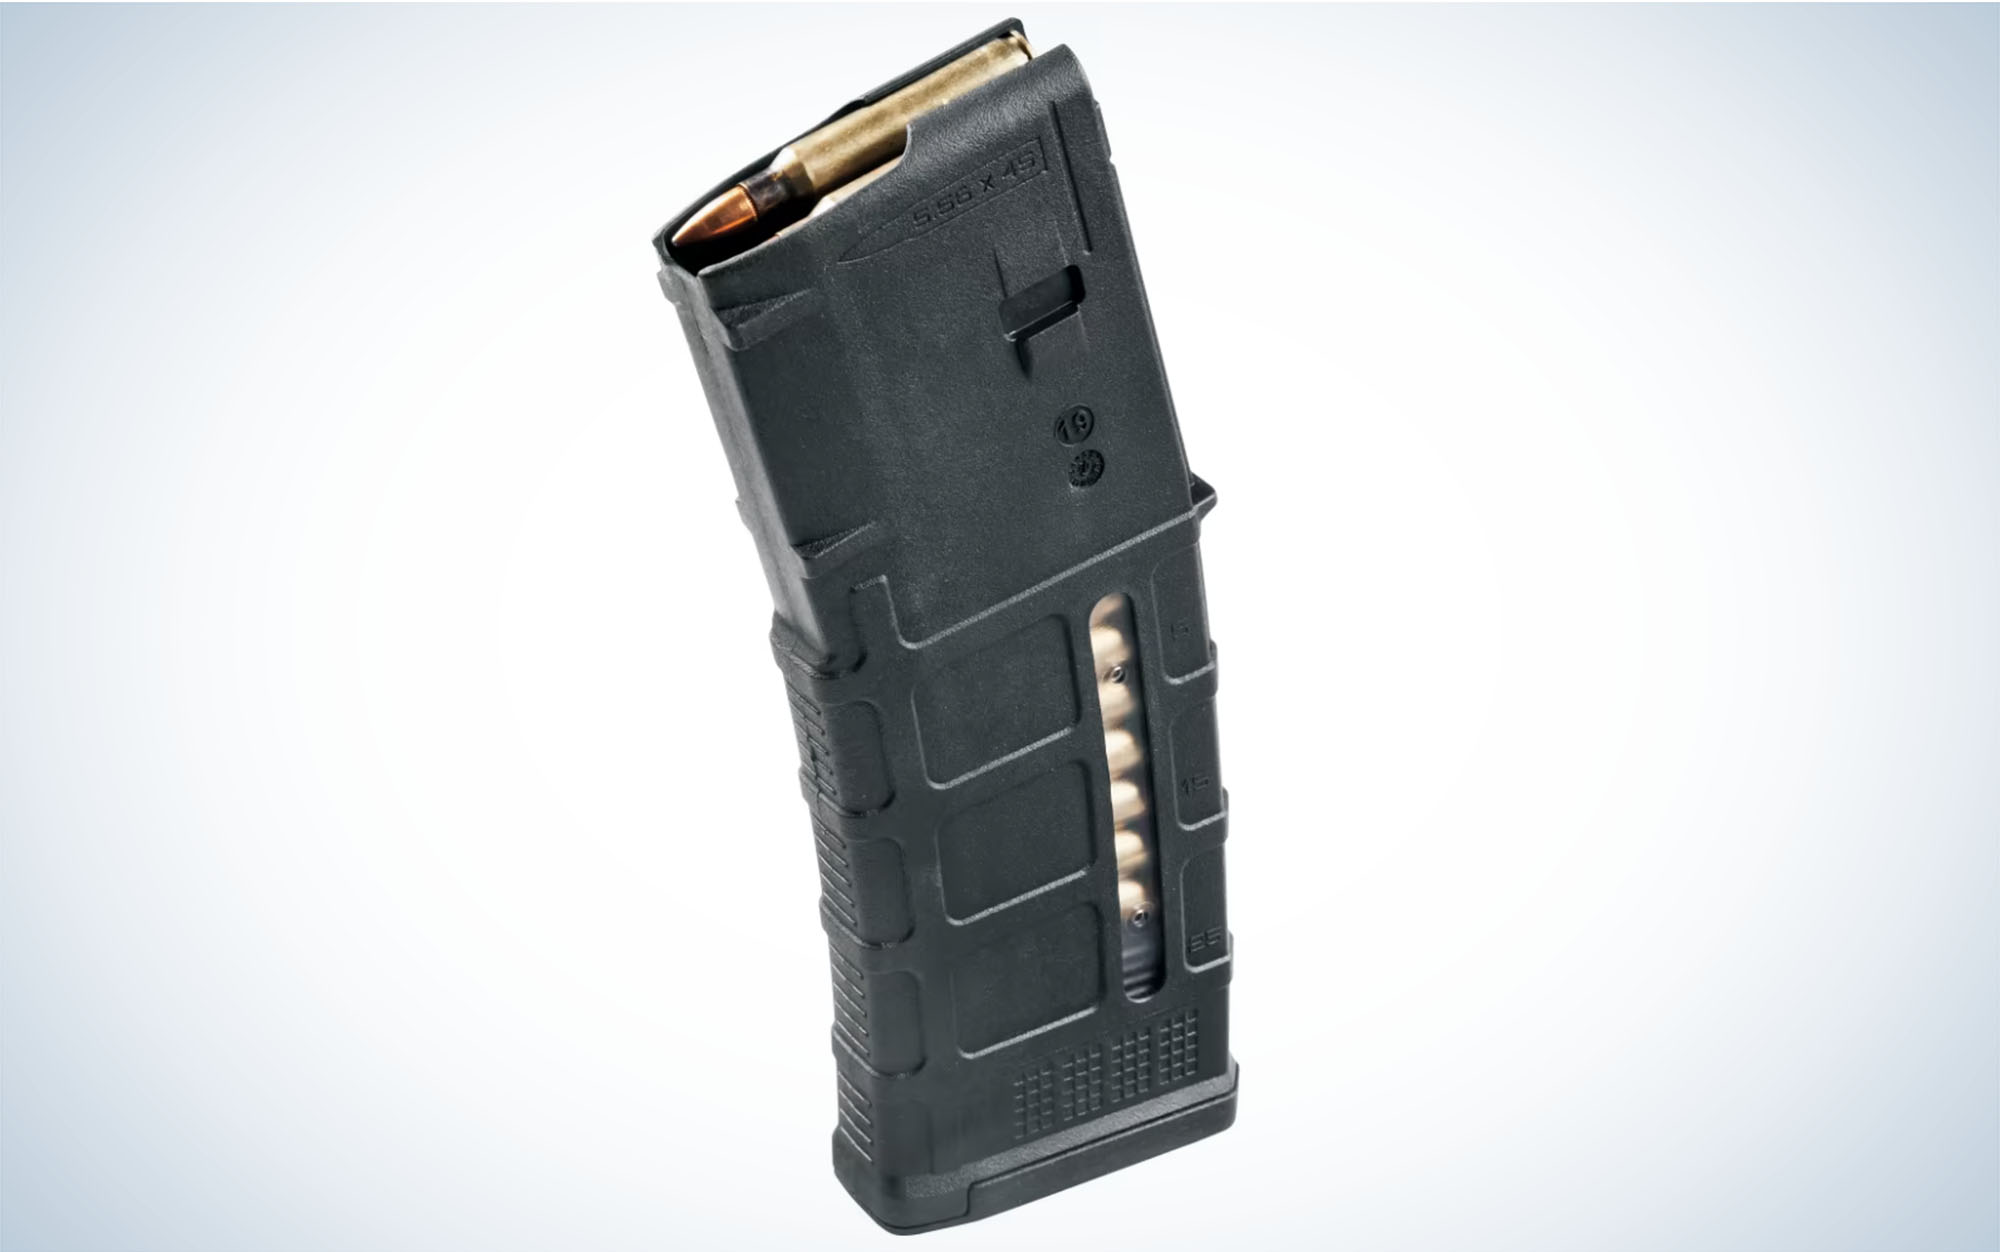 The Magpul PMAG 30 AR/M4 GEN M3 WindowÂ is one of the best AR mags.